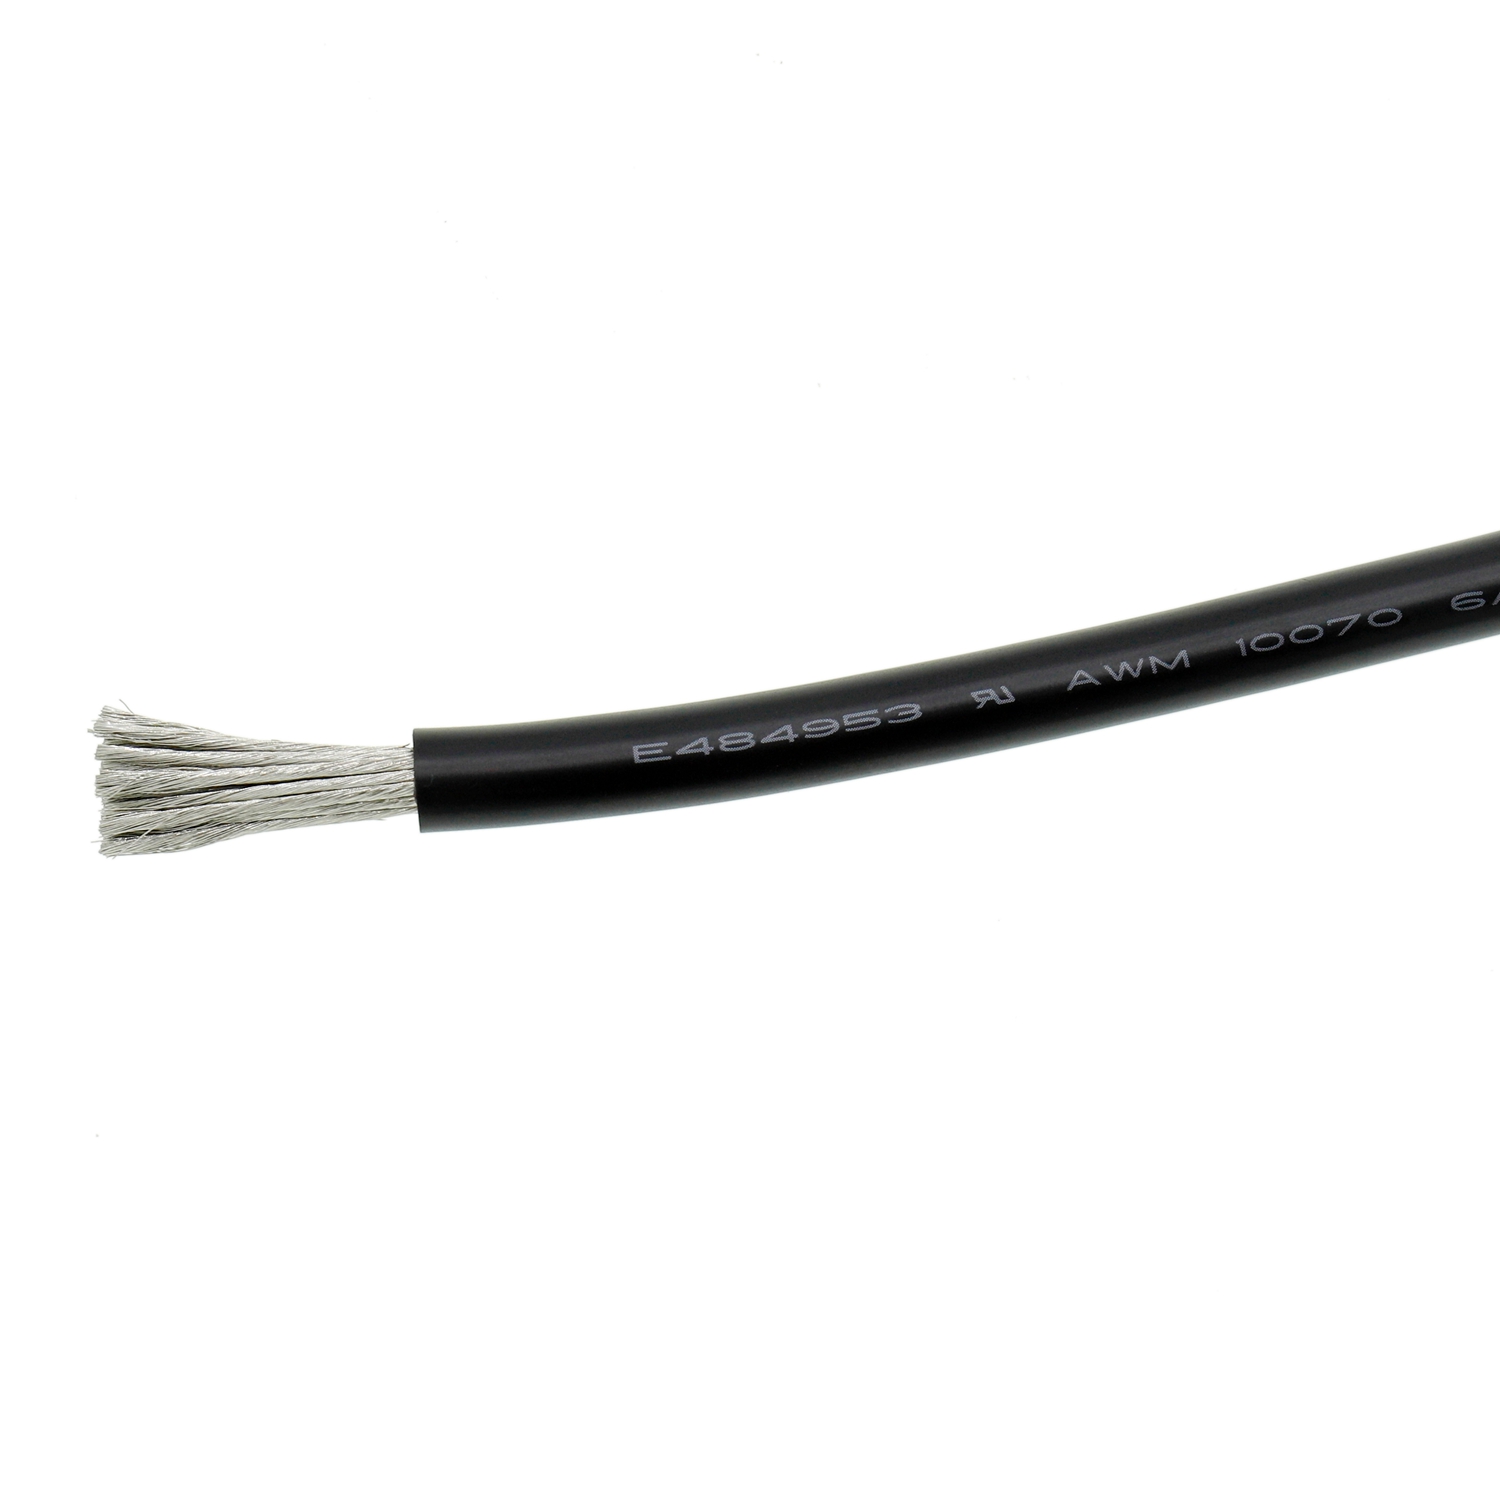 UL10070 AWM Extra Flexible Hookup Wire